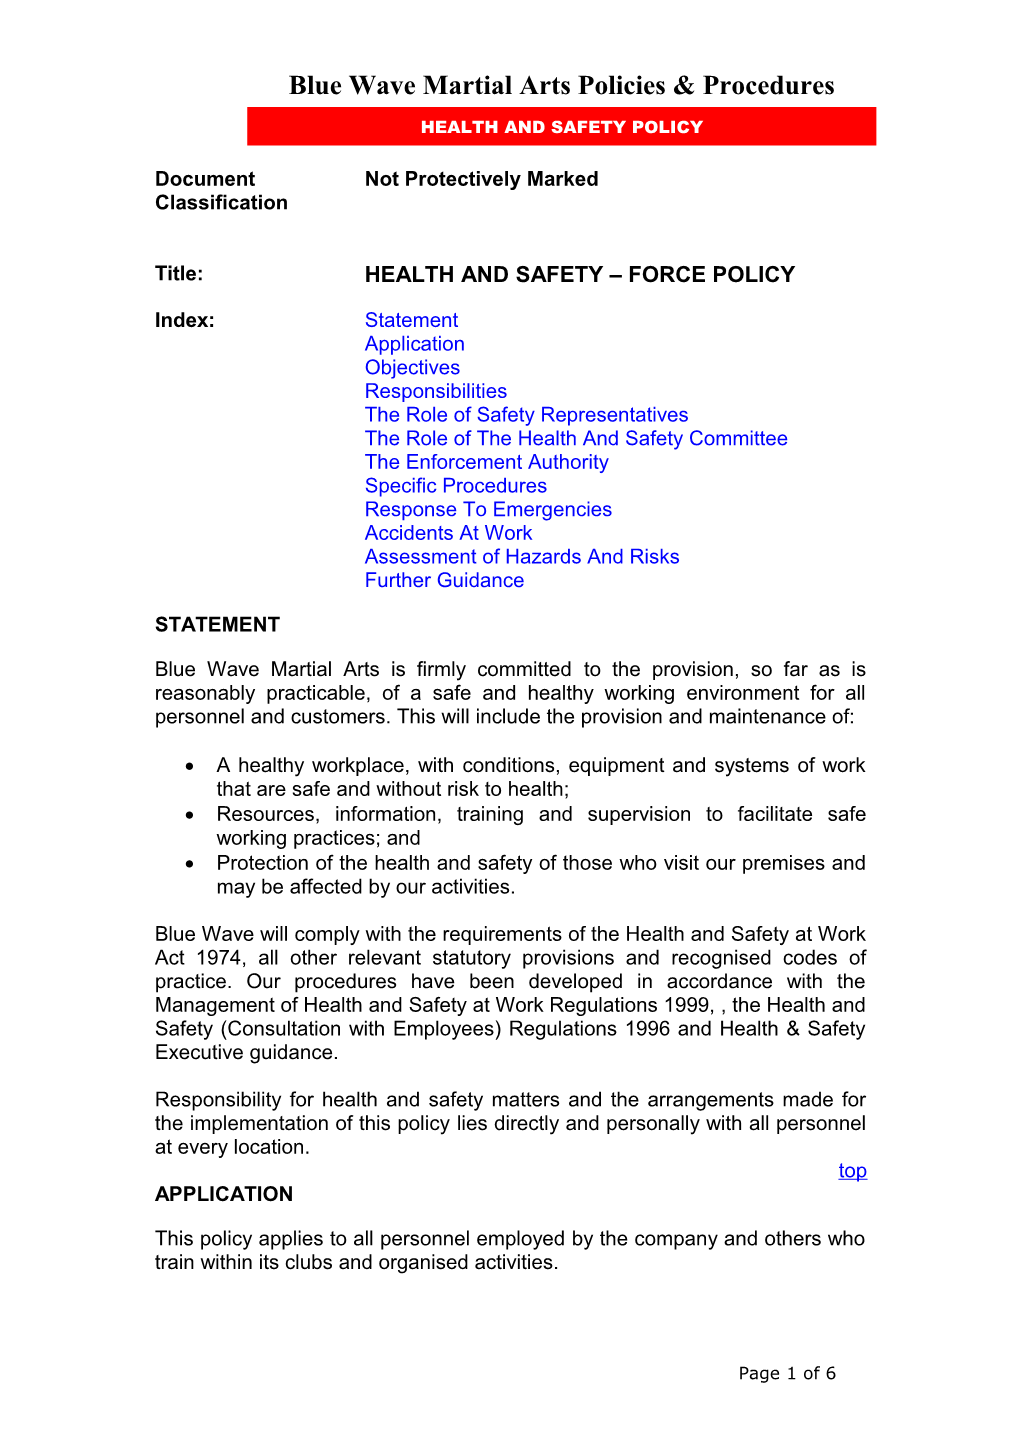 Health and Safety - Force Policy